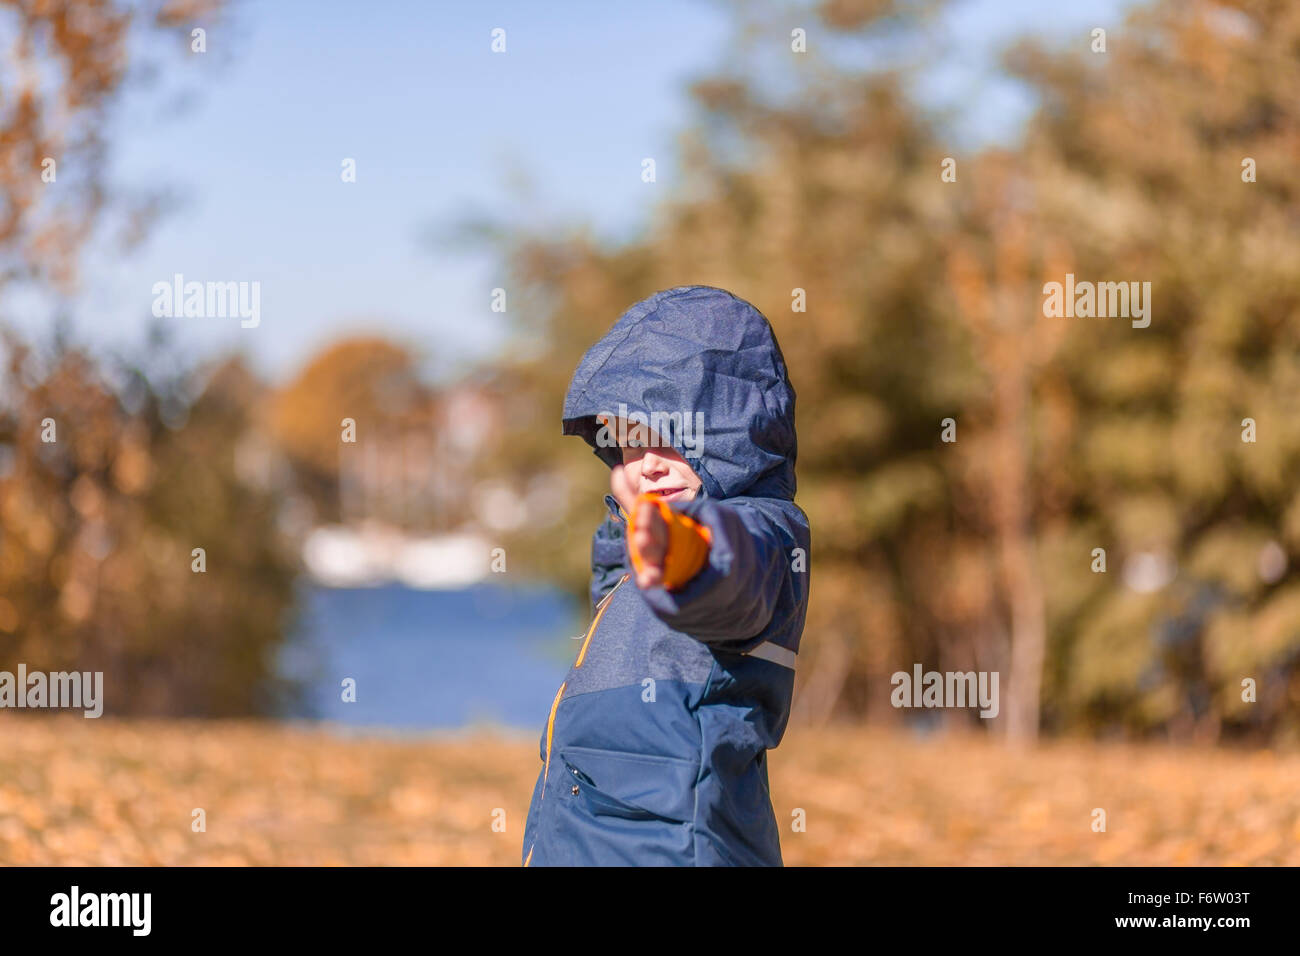 Little boy with rain jacket in the nature Stock Photo